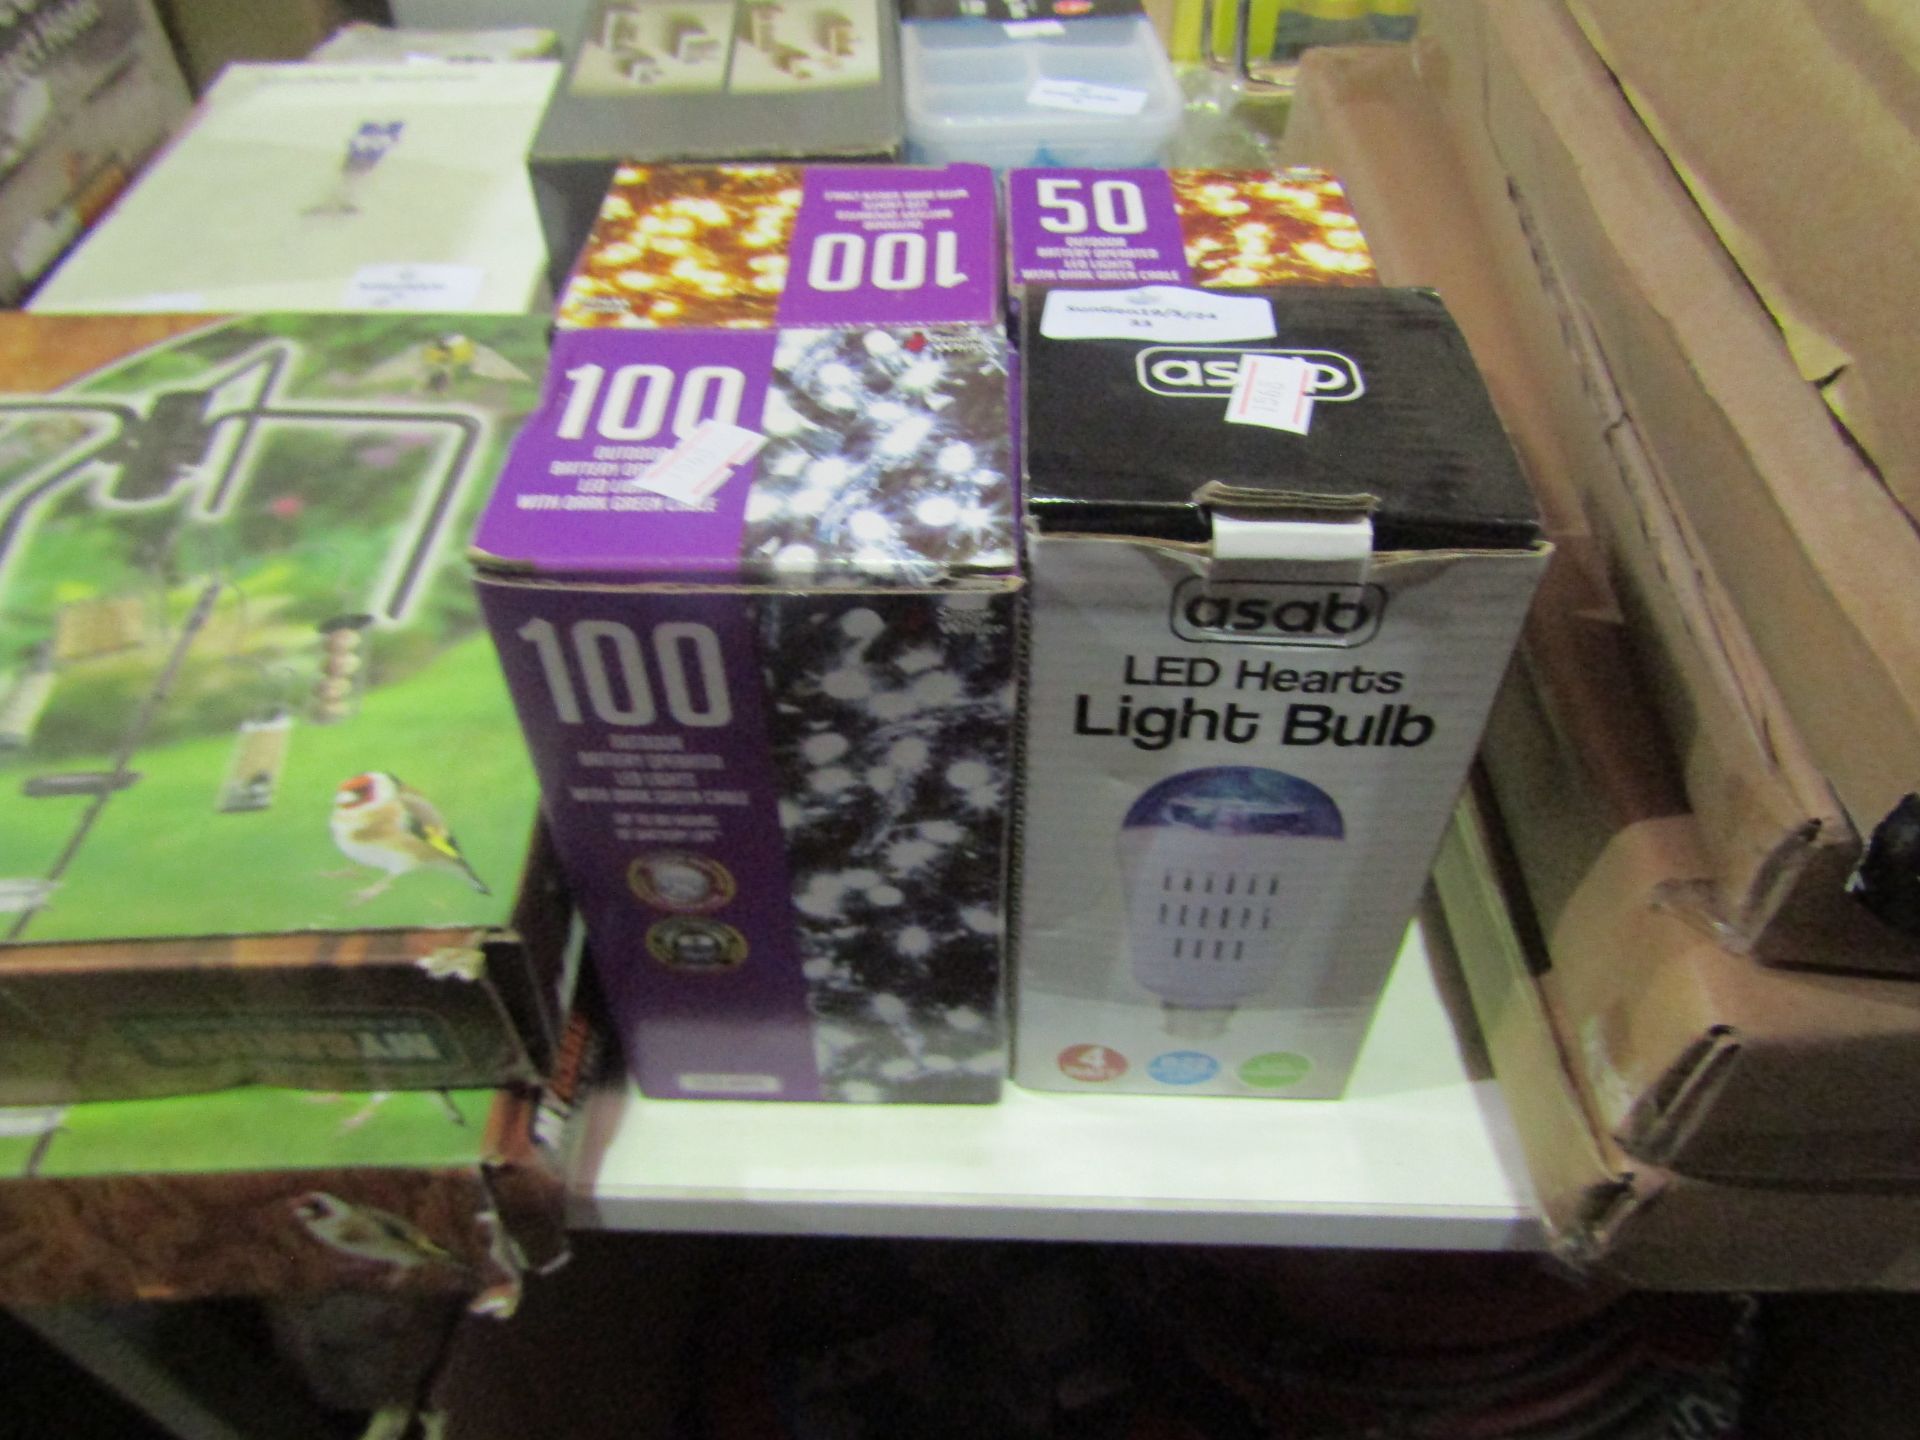 3x Items Being - 3x Boxes Of Outdoor Battery Operated Led Lights - 1x Asab Led Hearts Light Bulb -